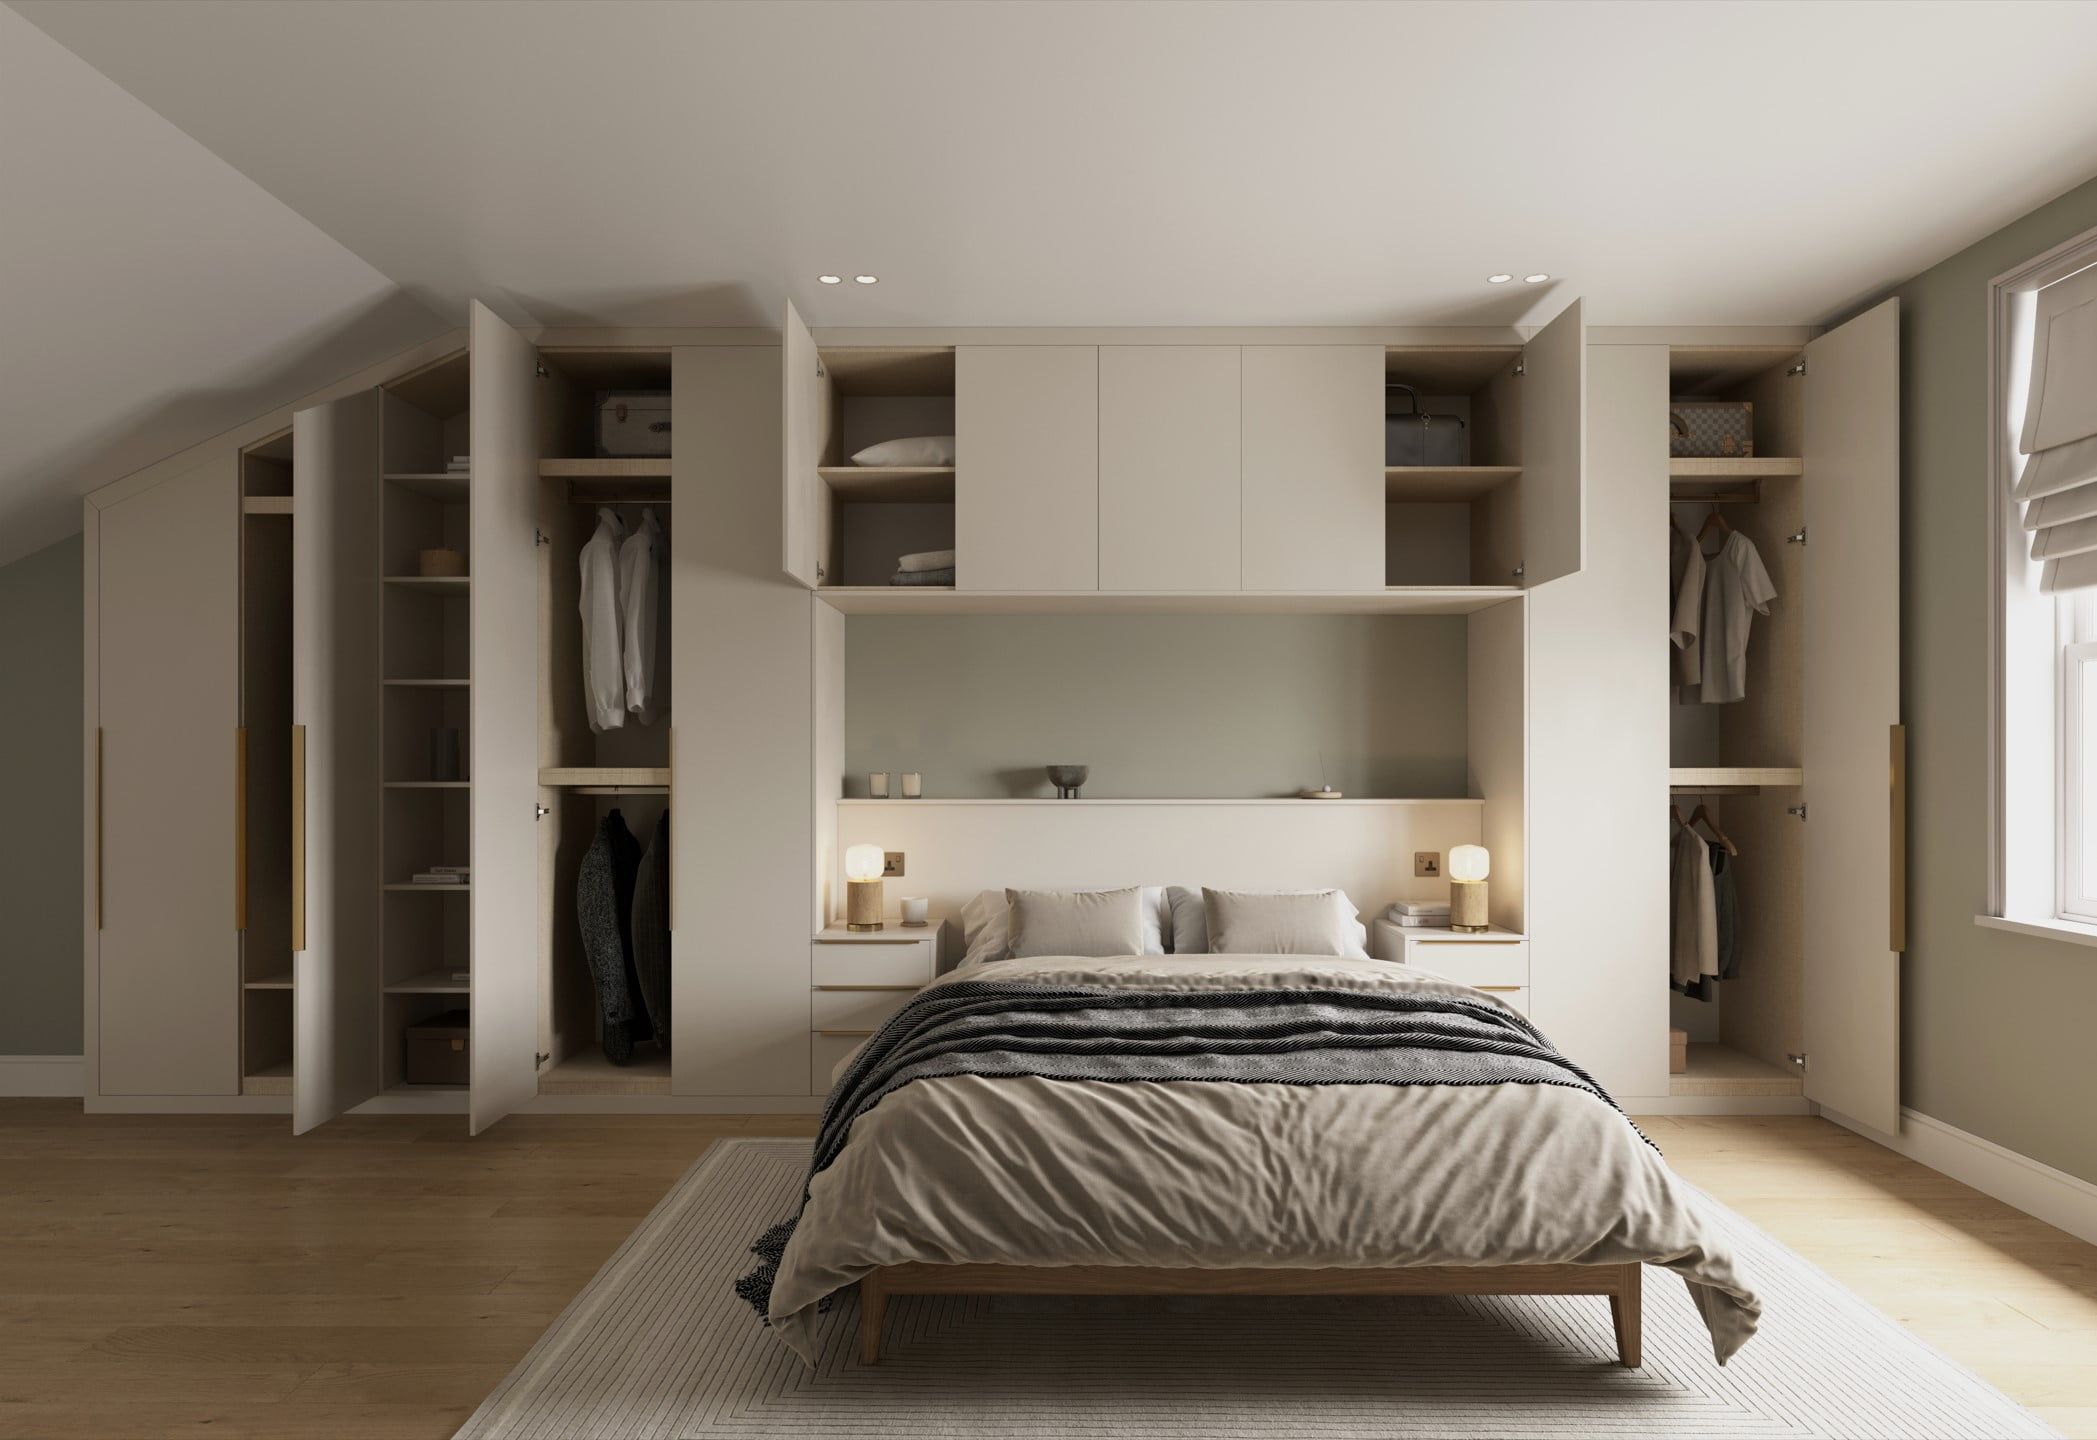 Overbed Fitted Wardrobes And Storage Units, Bespoke Overhead Storage Within Bedroom Wardrobes Storages (View 6 of 15)